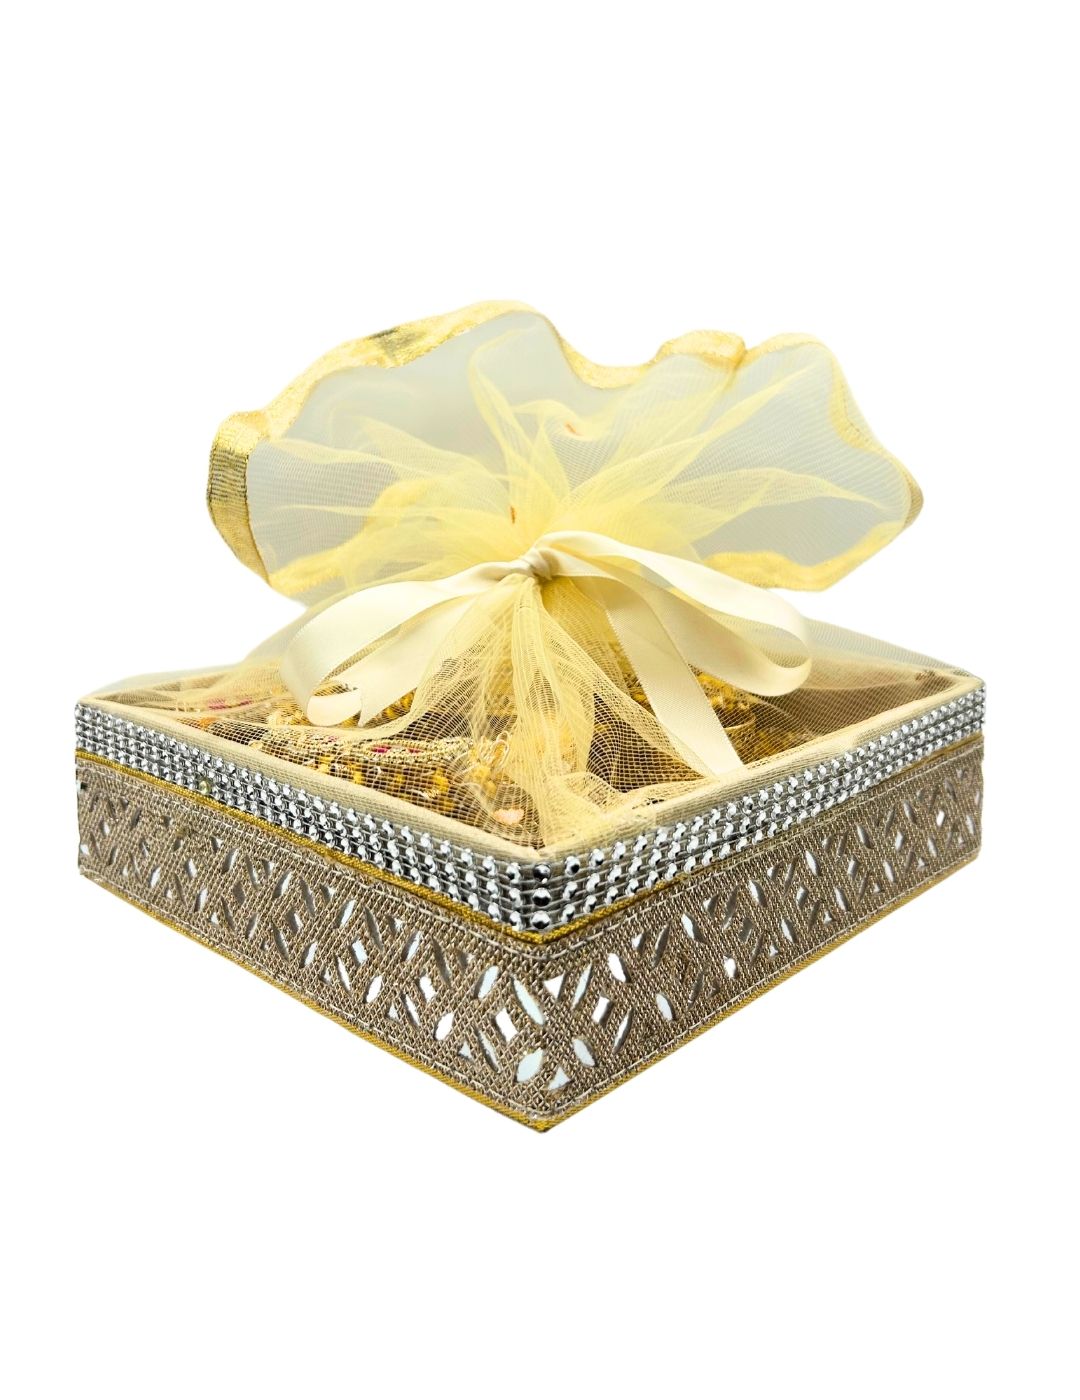 PREMIUM GIFT PACKAGING WITH DIYA, COPPER BOTTLE AND TEA